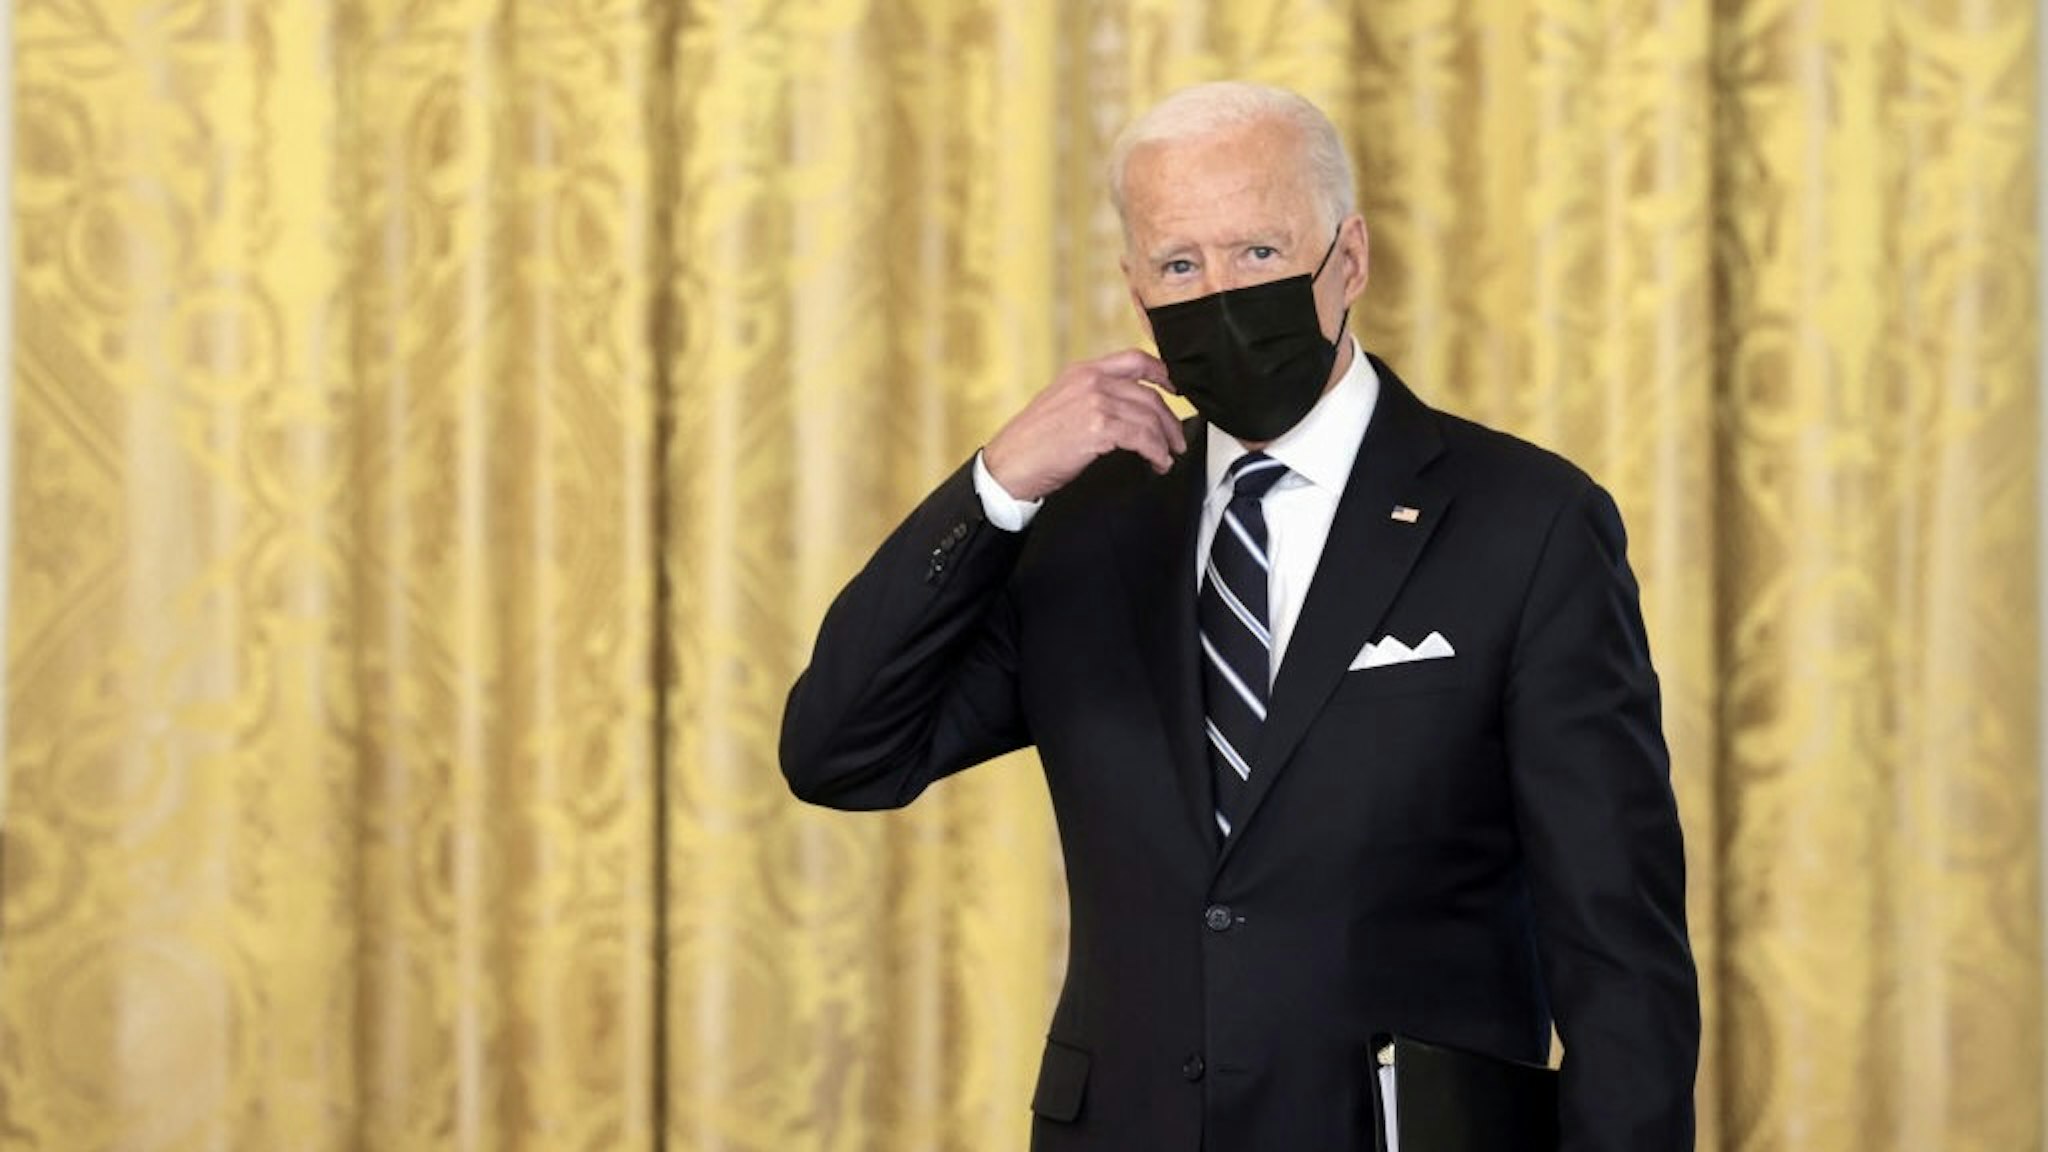 President Biden Delivers Remarks On Administration's Covid-19 Response WASHINGTON, DC - AUGUST 18: U.S. President Joe Biden removes his face mask as he arrives to deliver remarks on the COVID-19 response and the vaccination program in the East Room of the White House on August 18, 2021 in Washington, DC. During his remarks, President Biden announced that he is ordering the United States Department of Health and Human Services to require nursing homes to have vaccinated staff in order for them to receive Medicare and Medicaid funding. The President also announced that Americans would be able to receive a third booster shot against Covid-19. (Photo by Anna Moneymaker/Getty Images) Anna Moneymaker / Staff via Getty Images